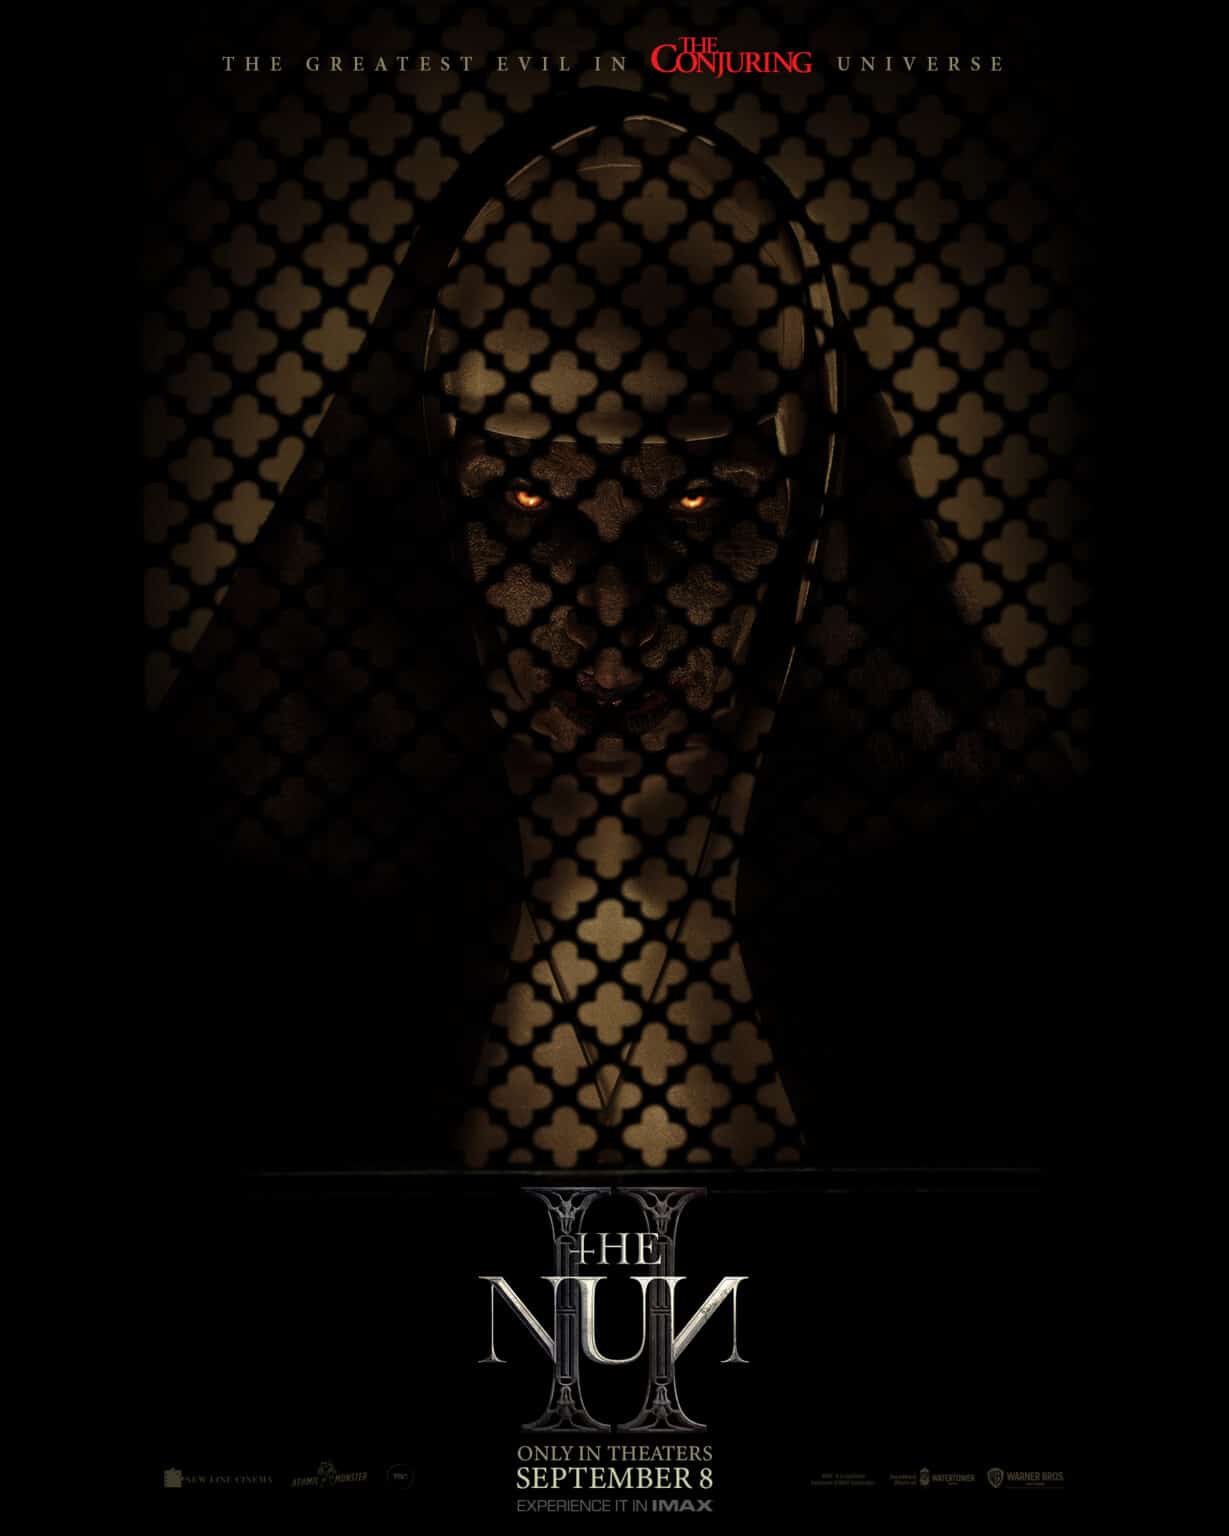 The Nun 2 has secured an R rating for violence and terror